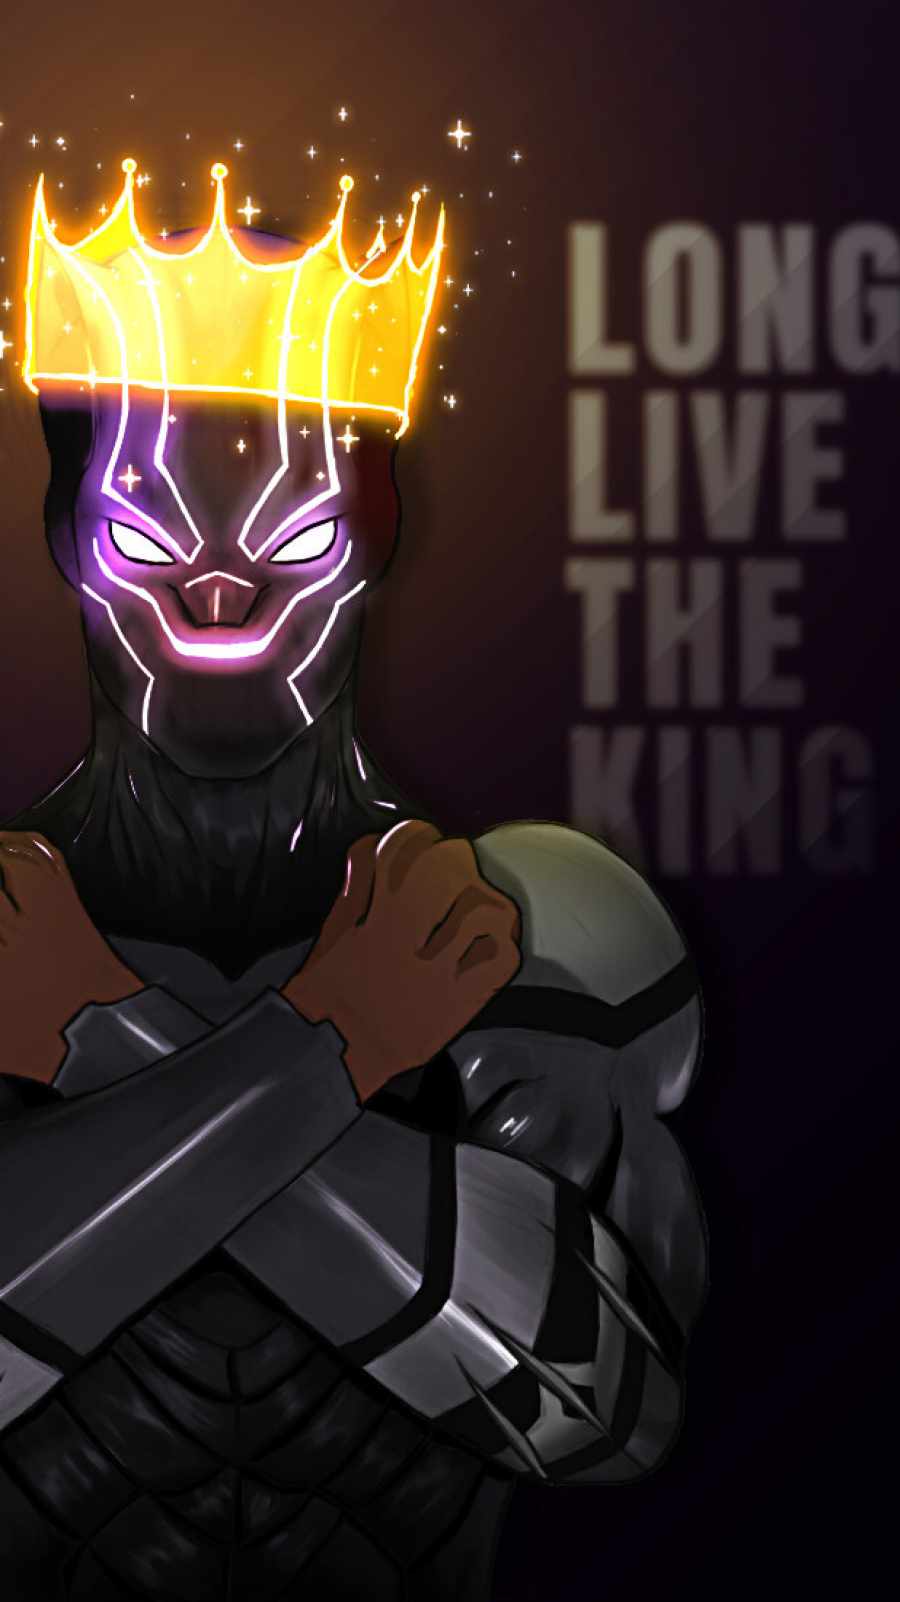 Long Live the King Black Panther iPhone Wallpaper HD